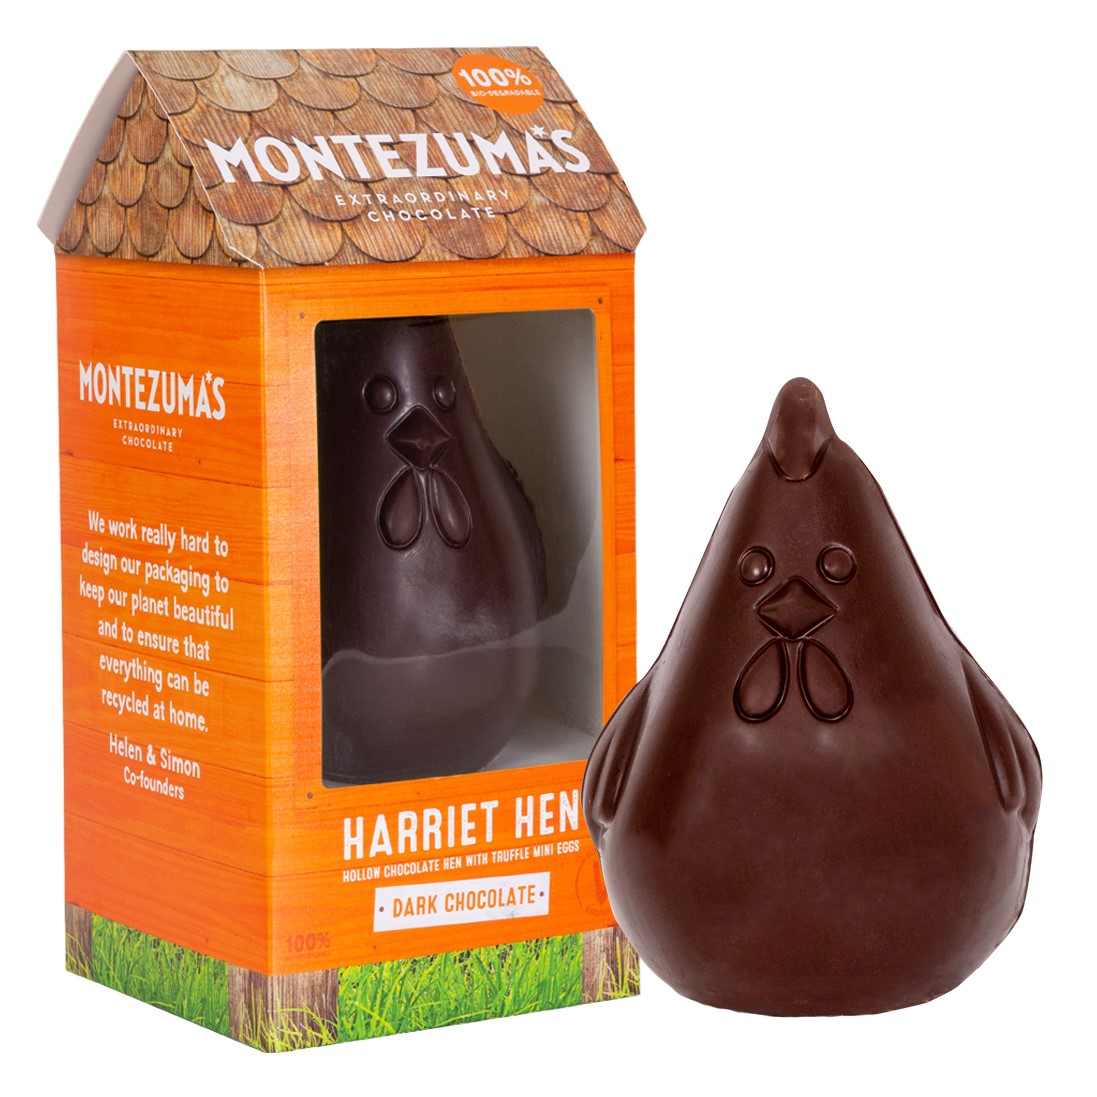 Dairy-Free Easter Chocolate in Australia, the UK and the rest of Europe - most options are vegan and gluten-free, some soy-free and nut-free, too! Pictured: Montezuma's Harriett Hen